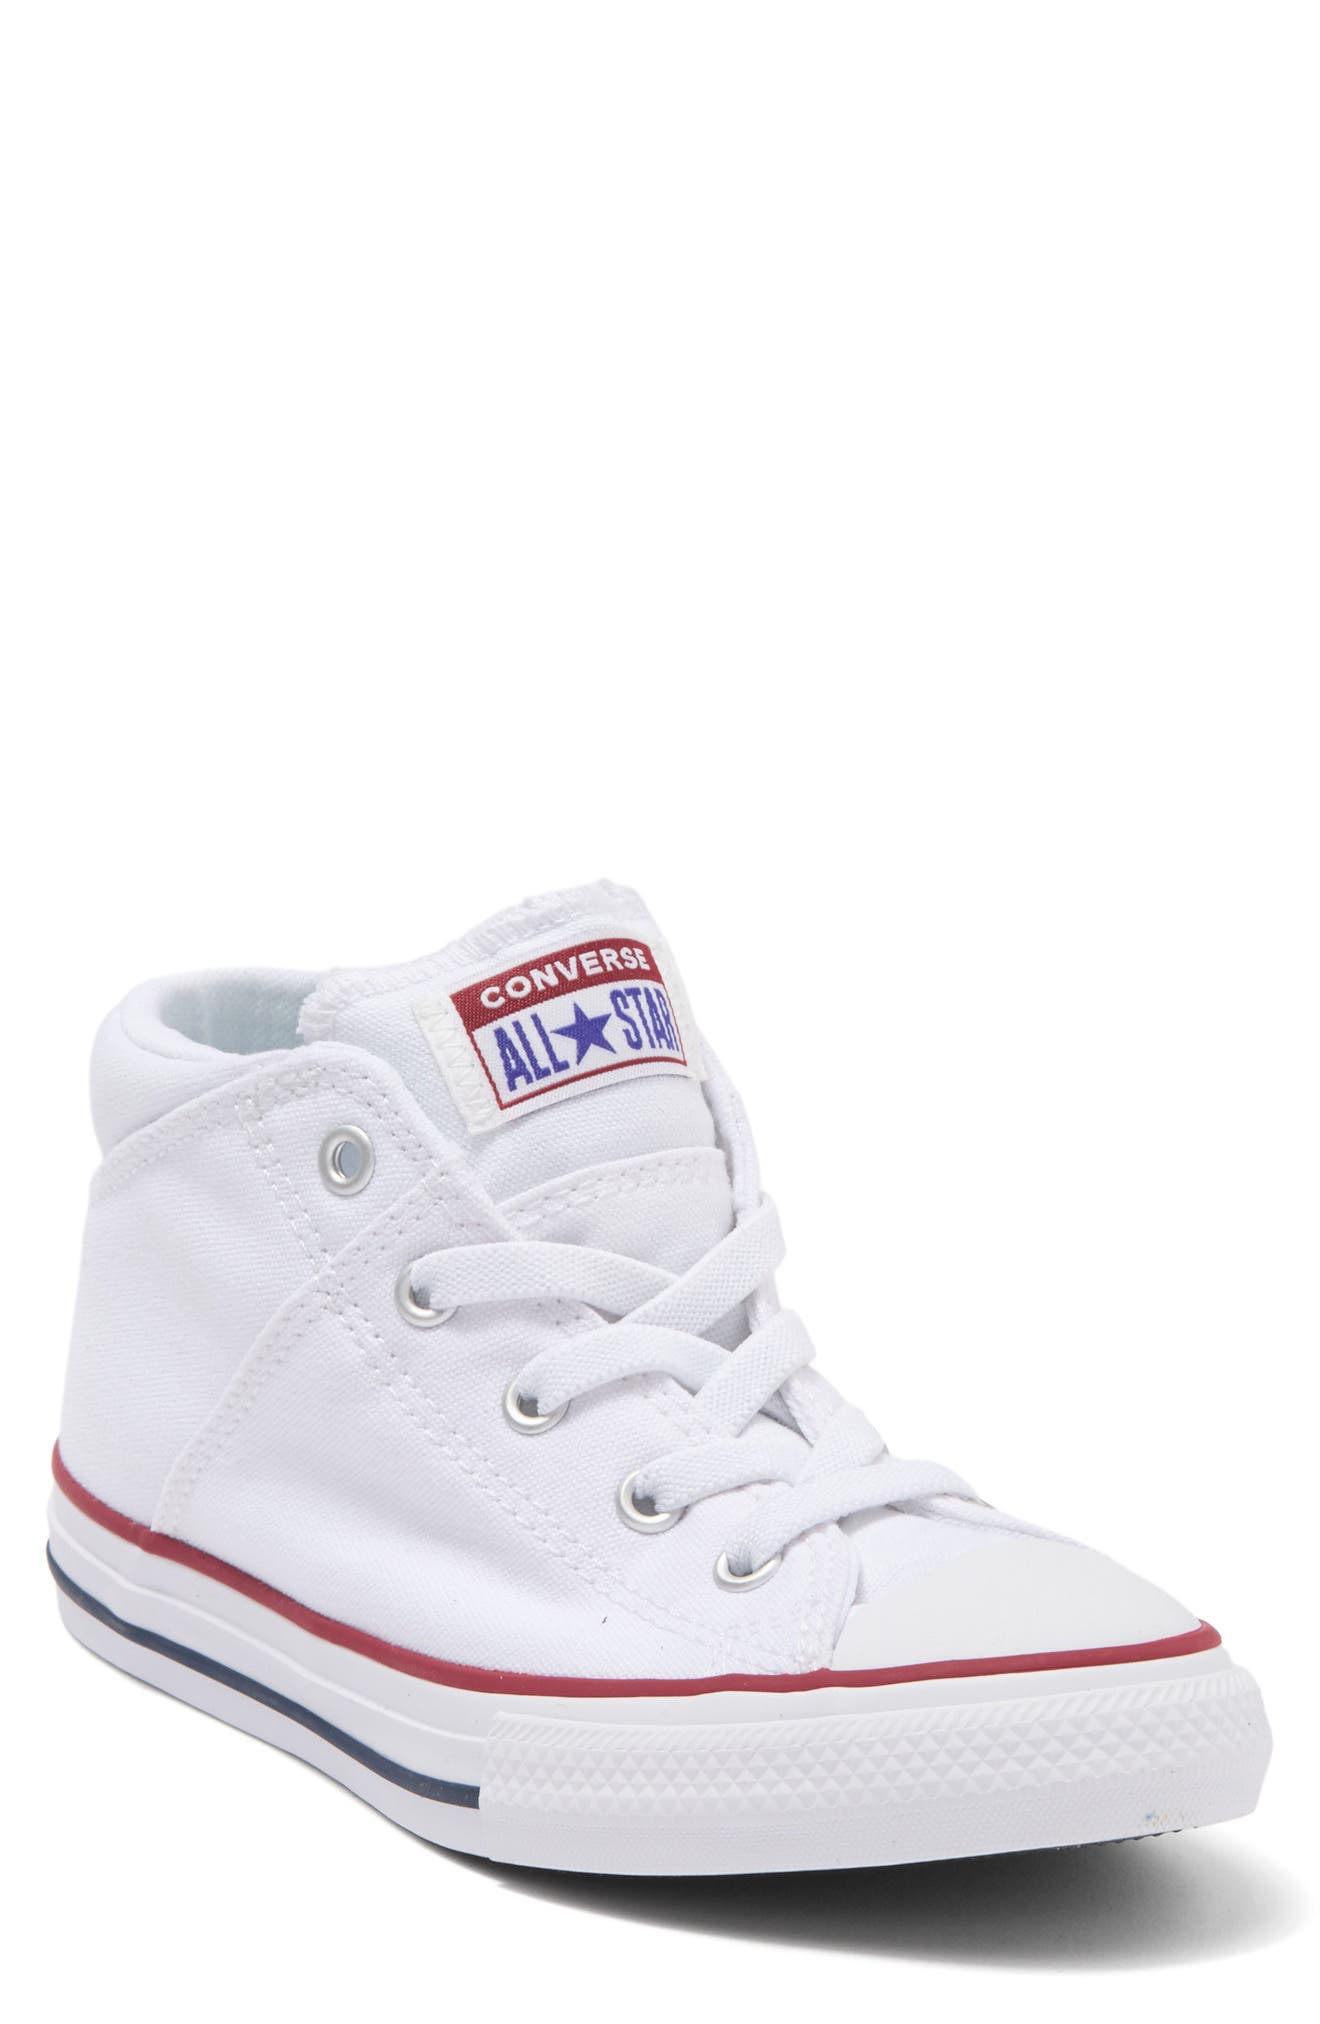 converse all star mid top